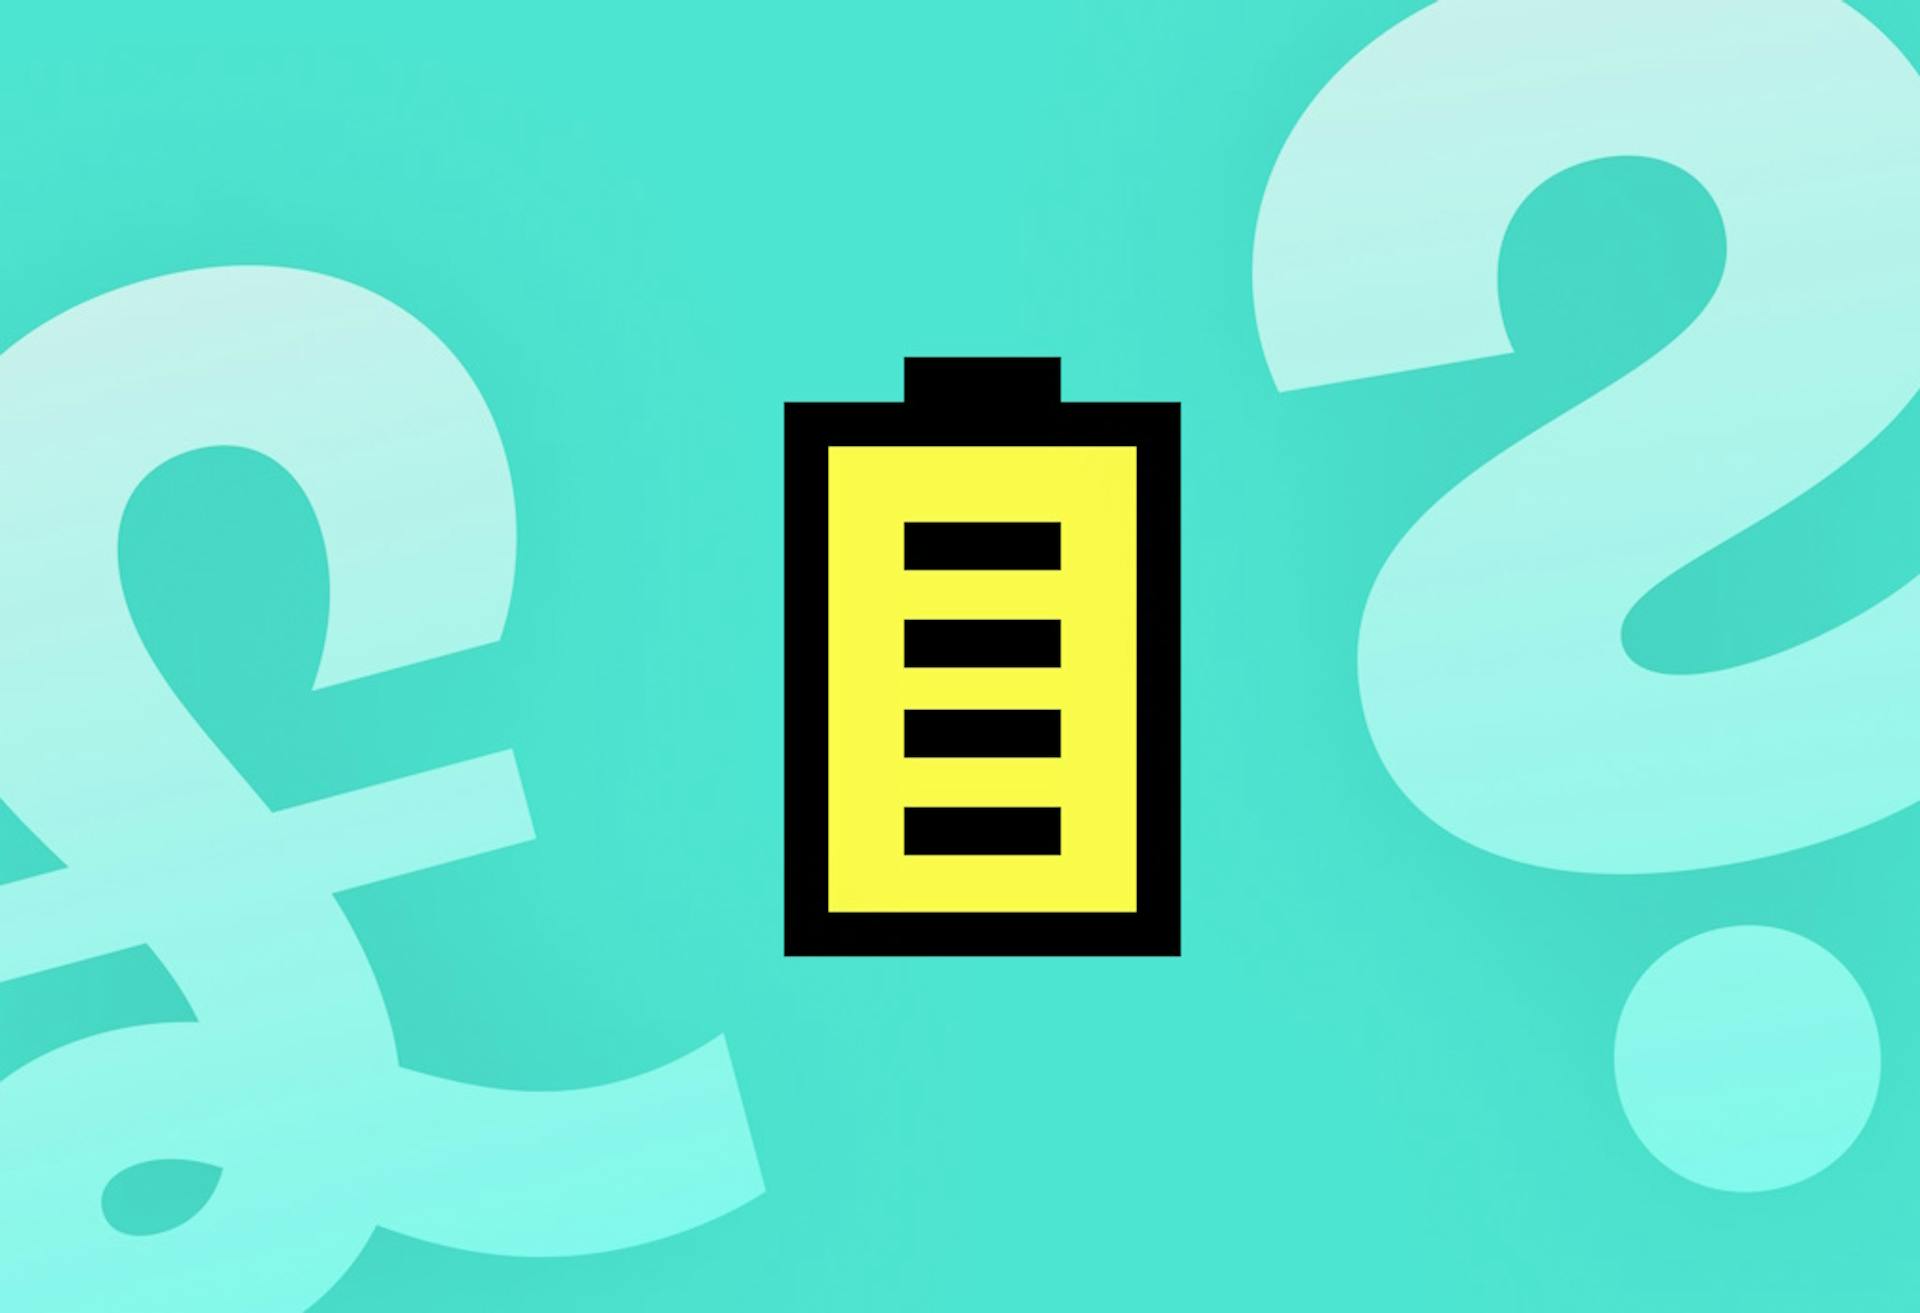 A graphic of a battery in yellow, outlined in black, against an aquamarine background with a large, light-blue question mark on the right and pound sign on the left